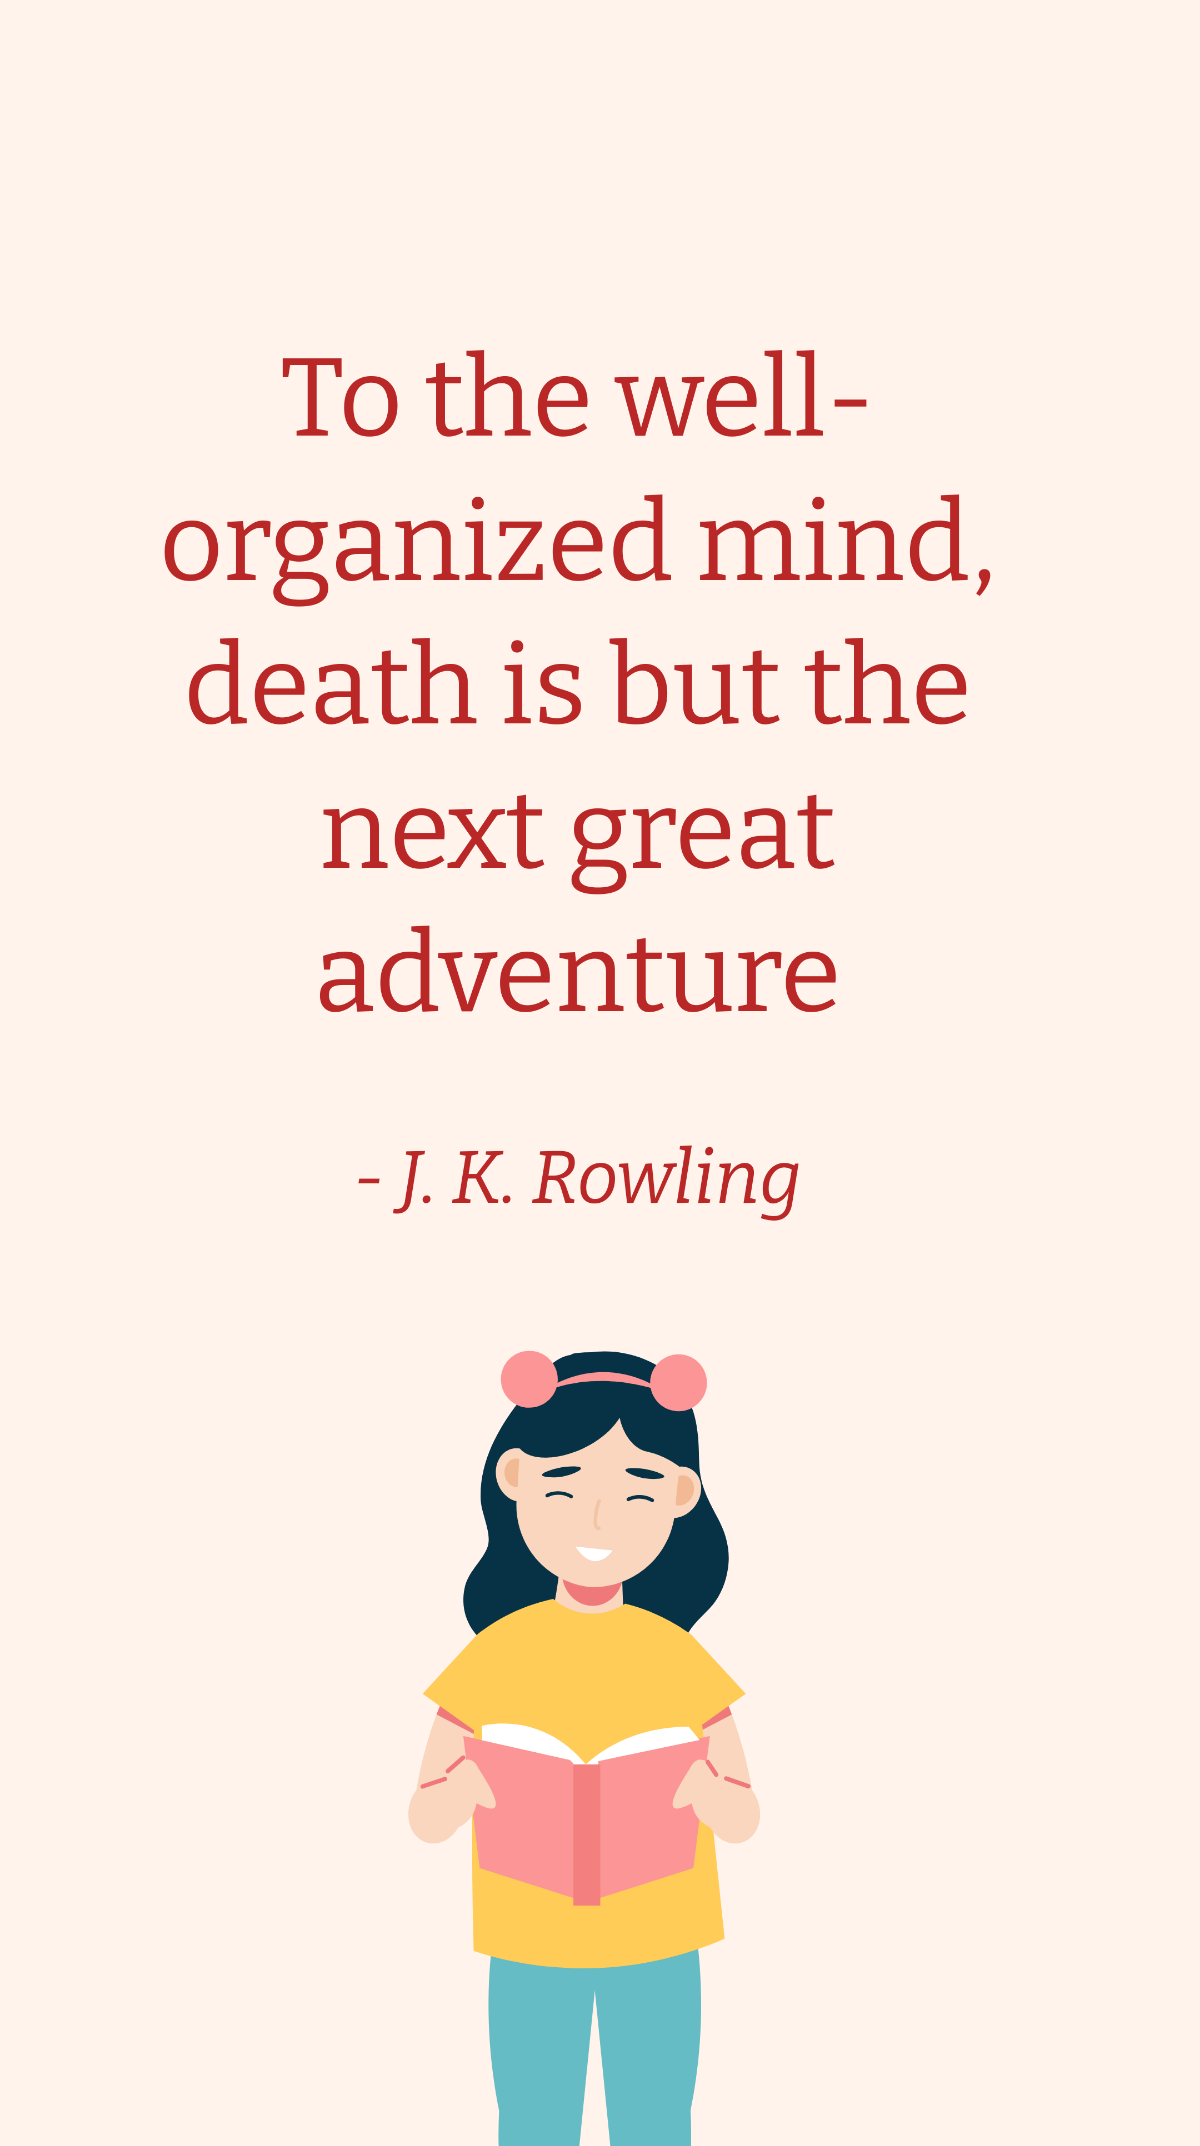 J. K. Rowling - To the well-organized mind, death is but the next great adventure